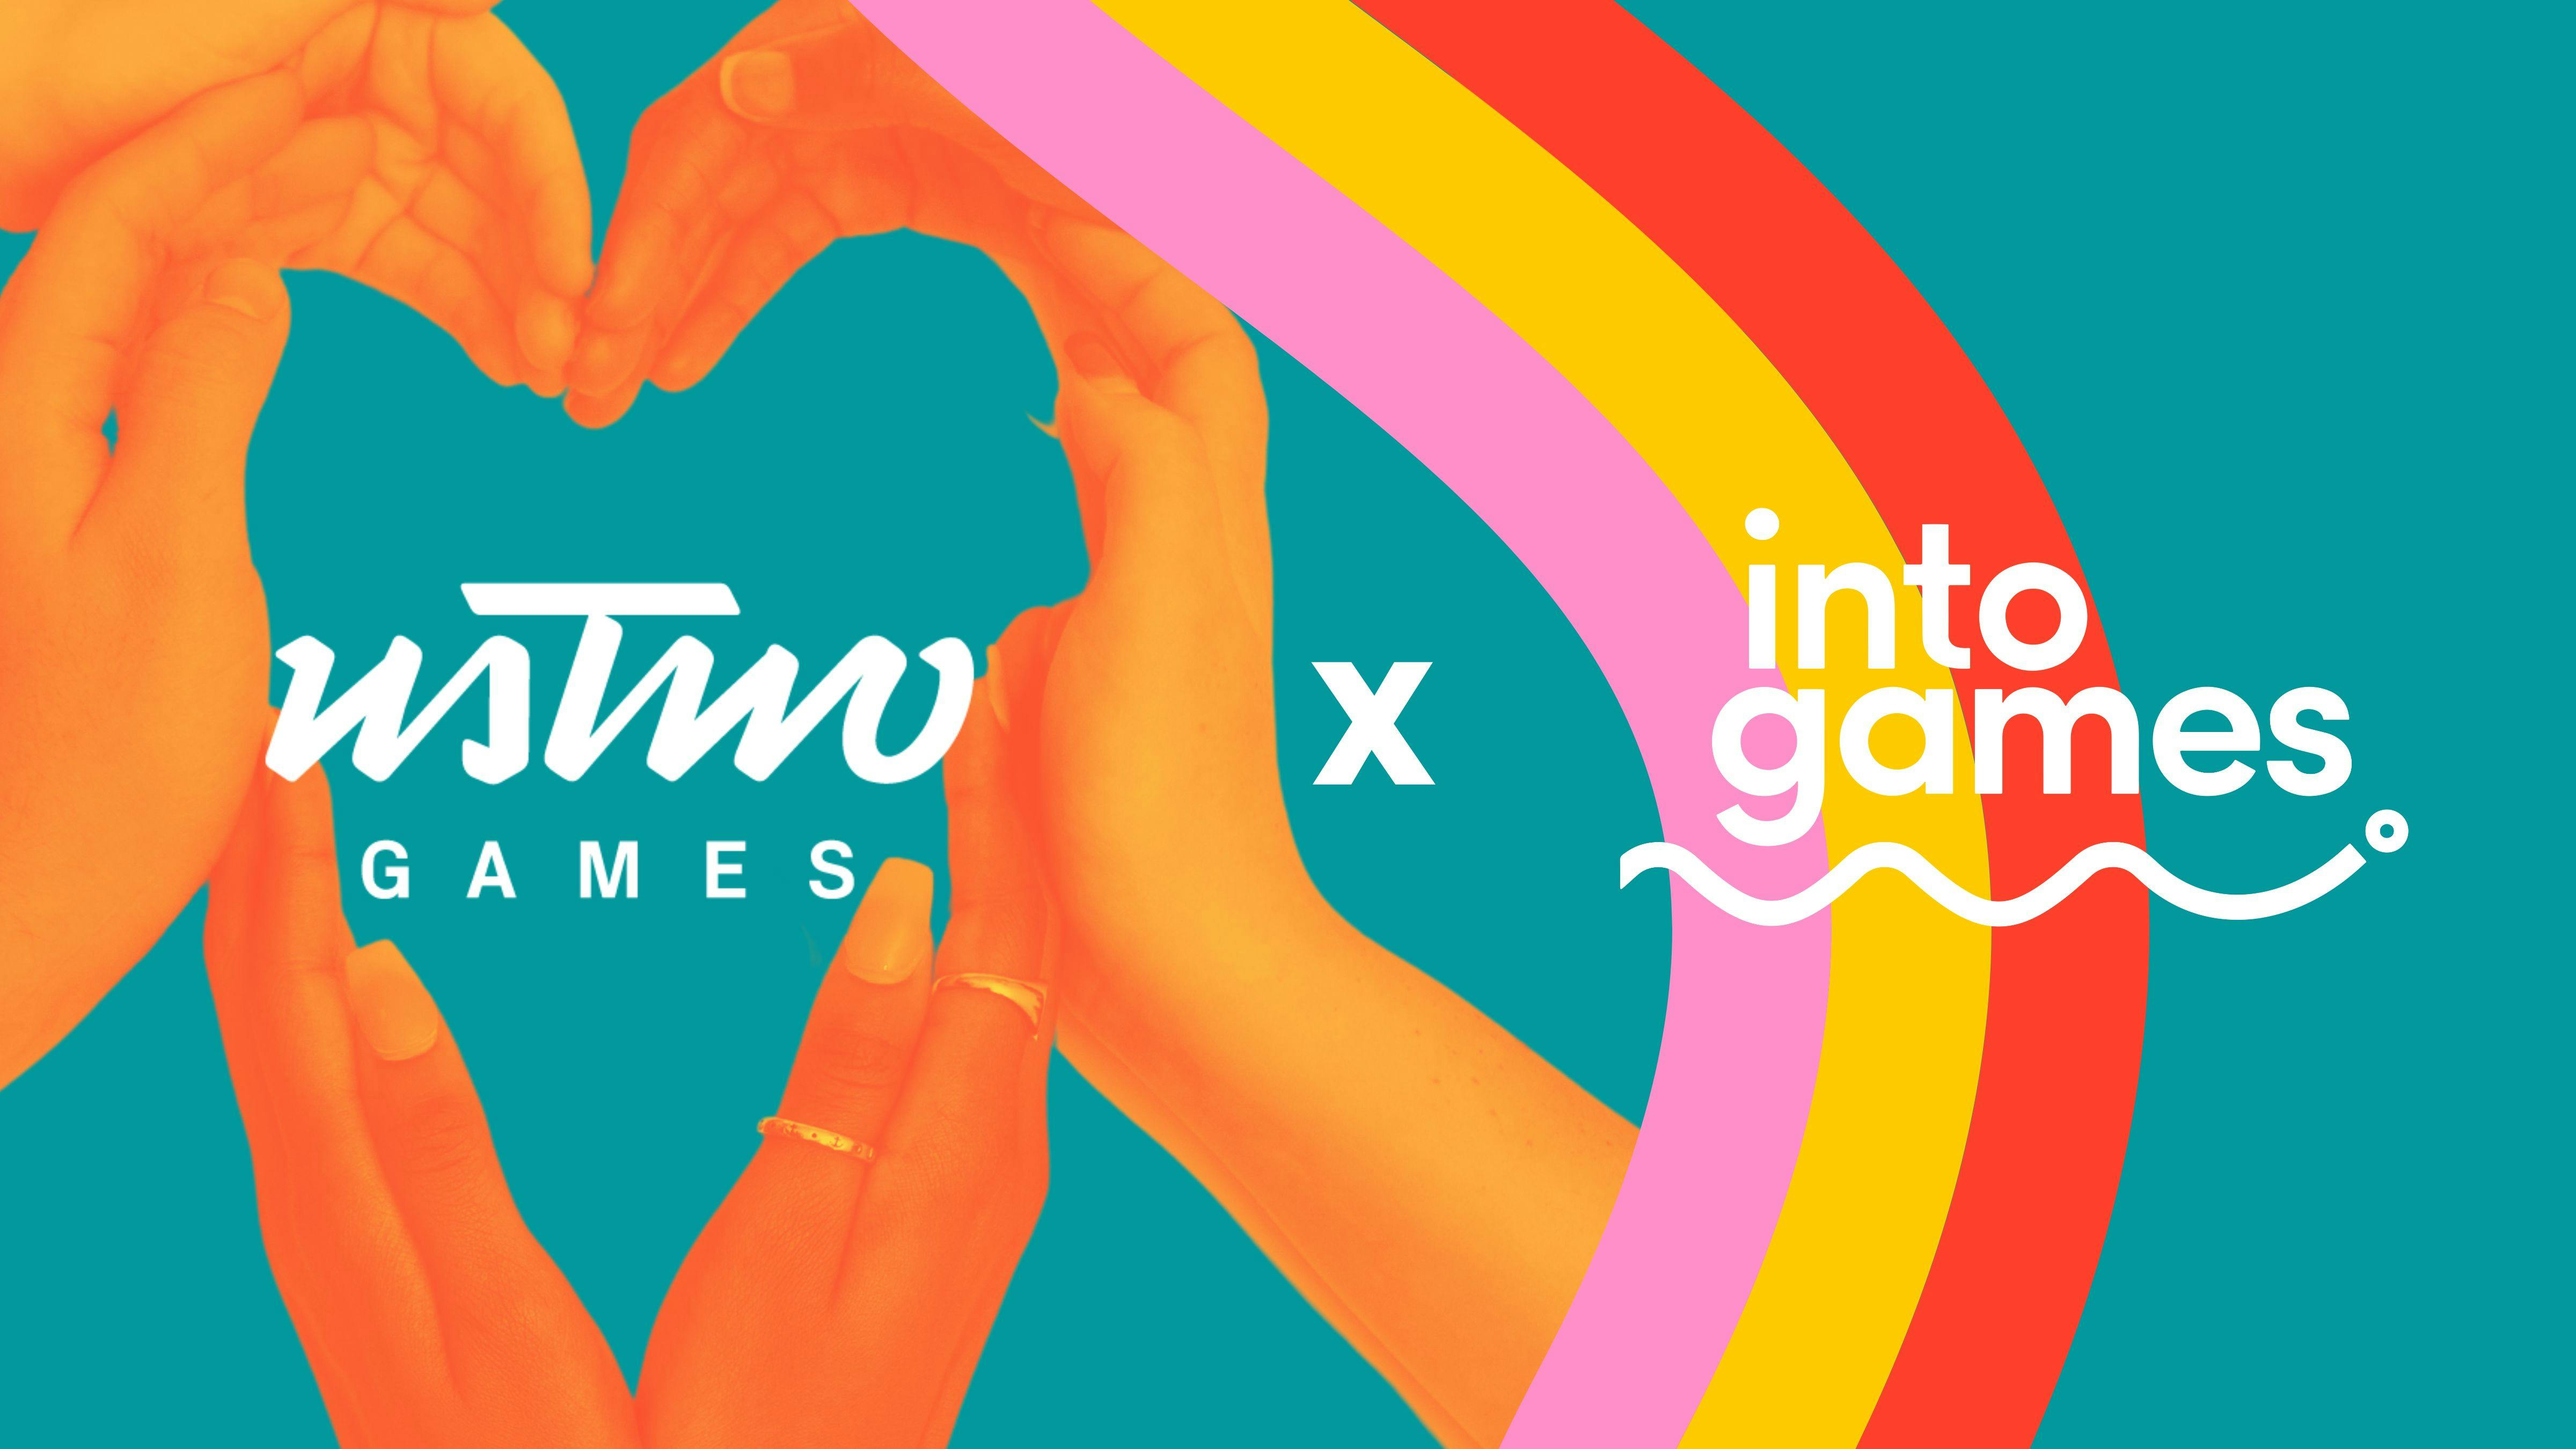 Into Games are partnering with ustwo games! 